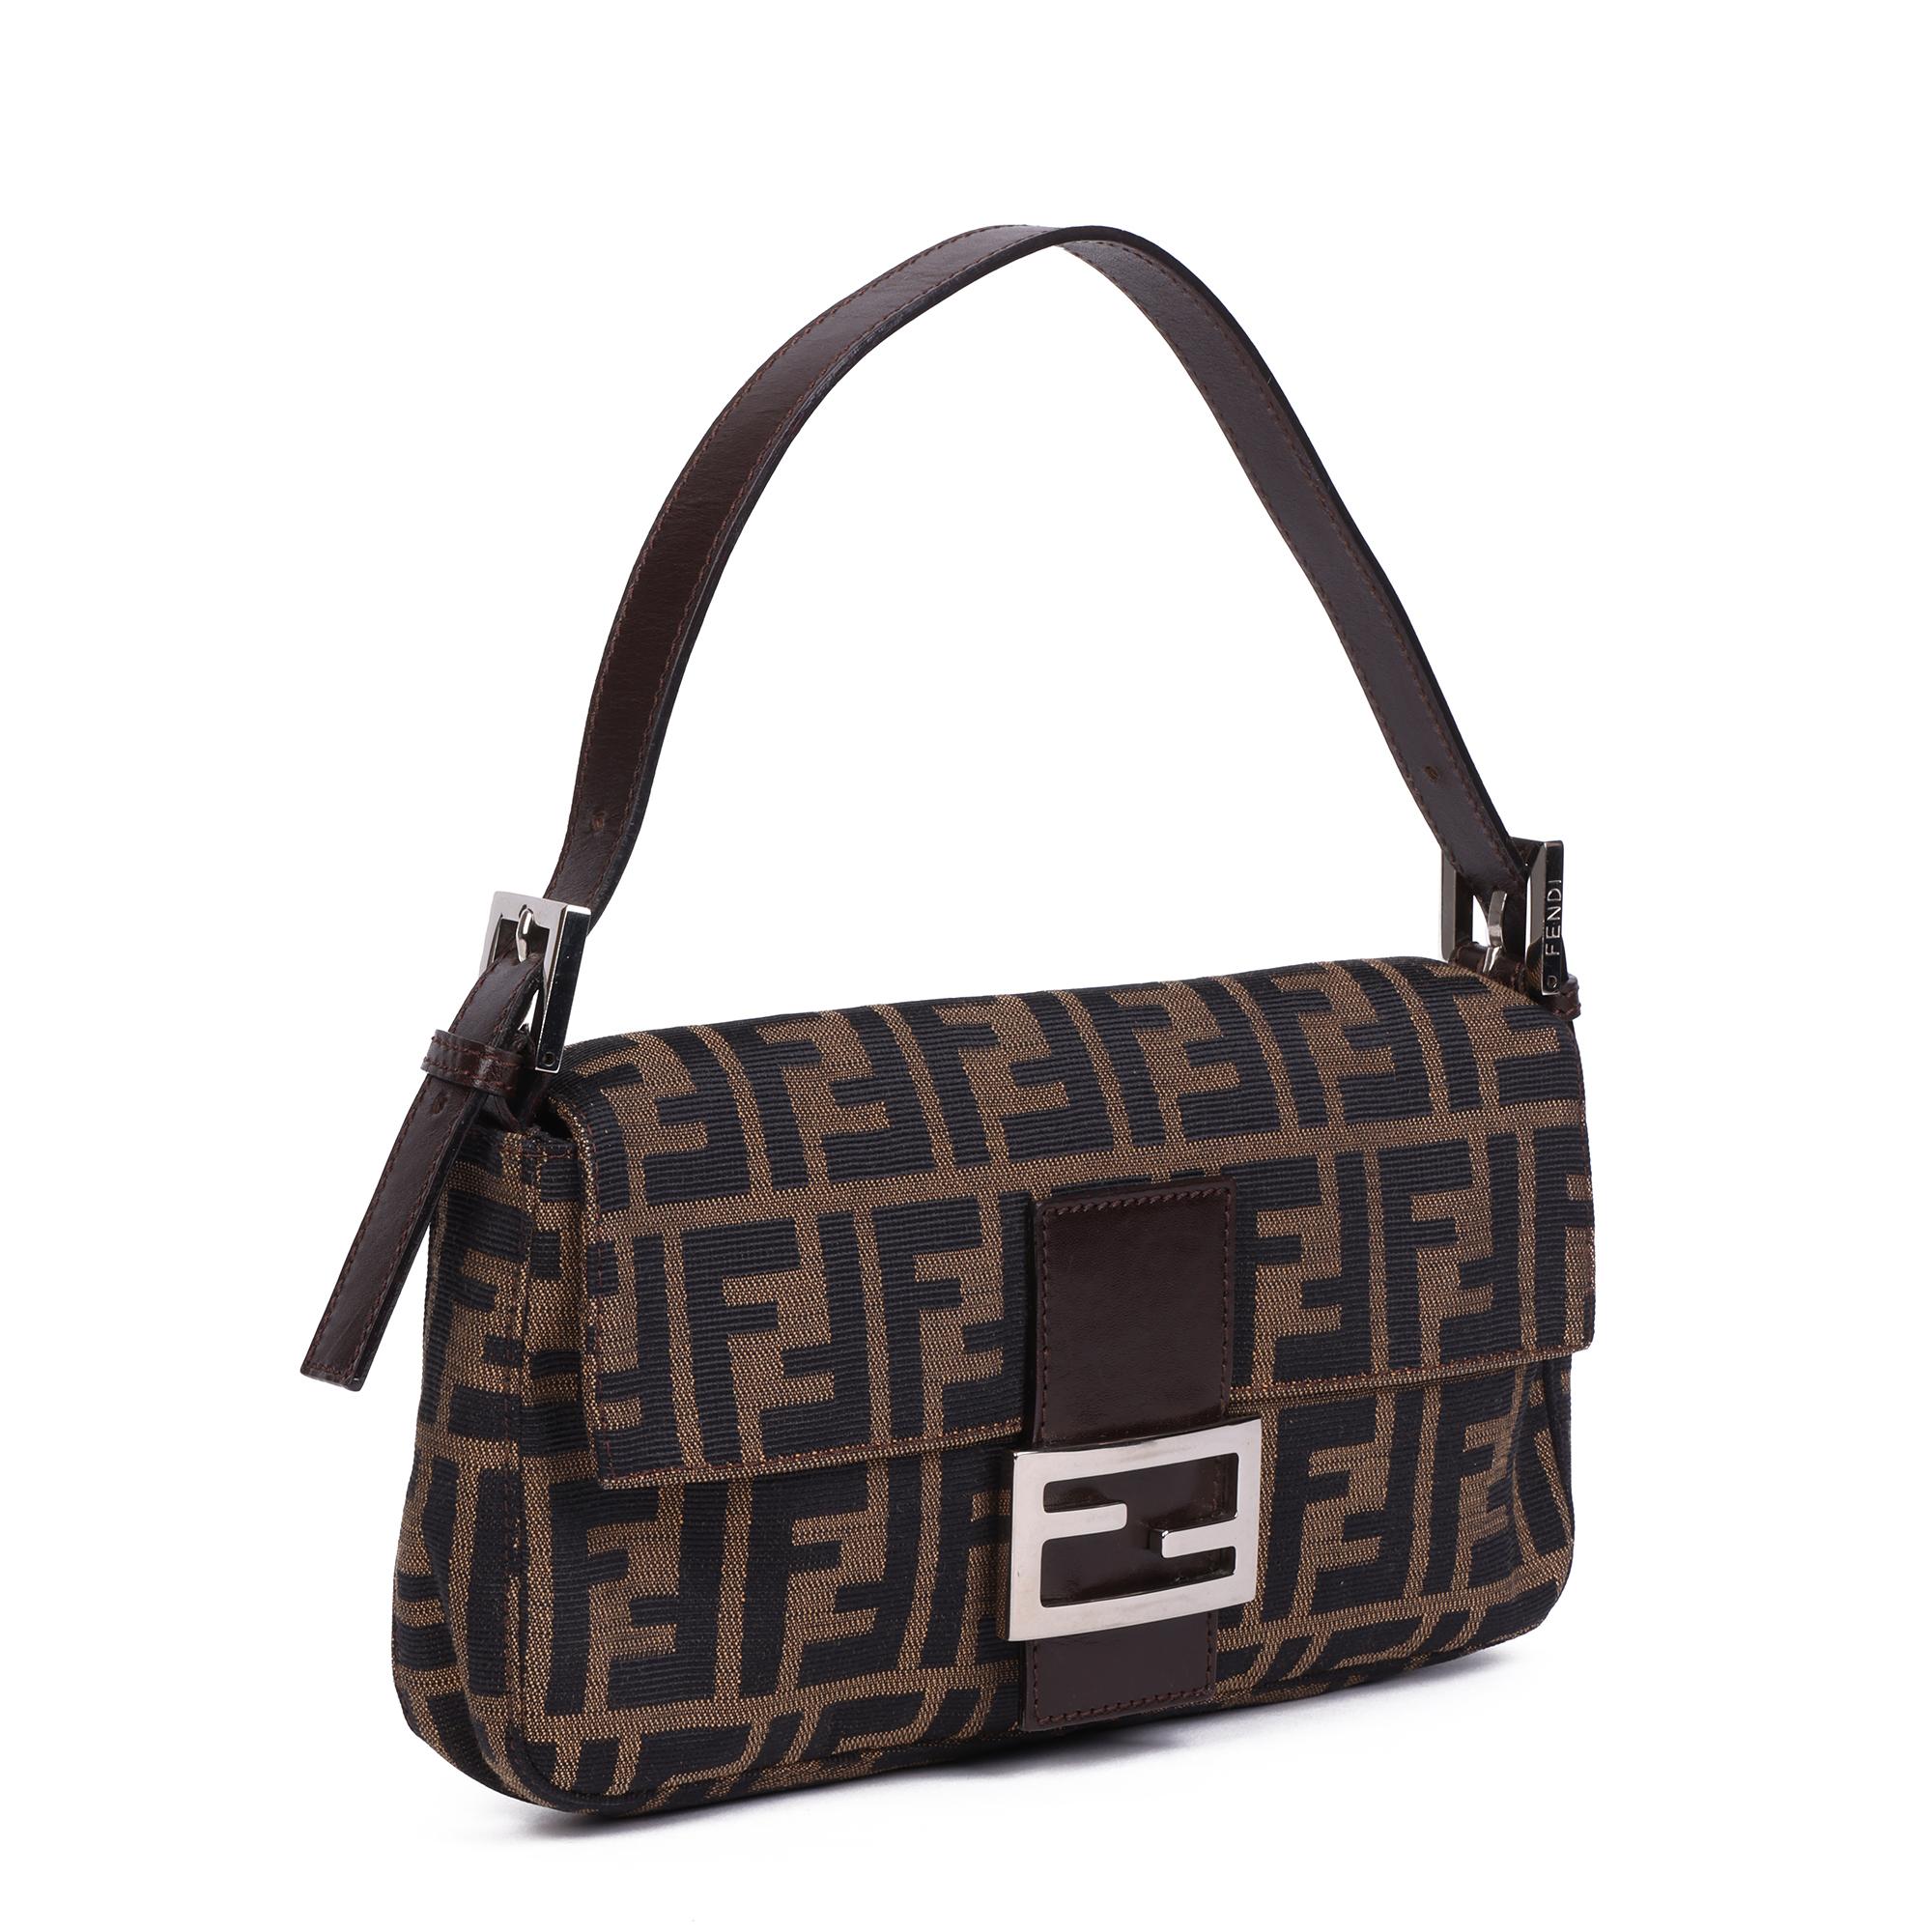 FENDI
Brown Zucca Canvas & Calfskin Leather Vintage Baguette

Xupes Reference: HB4126
Serial Number: Not Present
Age (Circa): 2000
Authenticity Details: Date Stamp (Made in Italy)
Gender: Ladies
Type: Top Handle

Colour: Brown
Hardware: